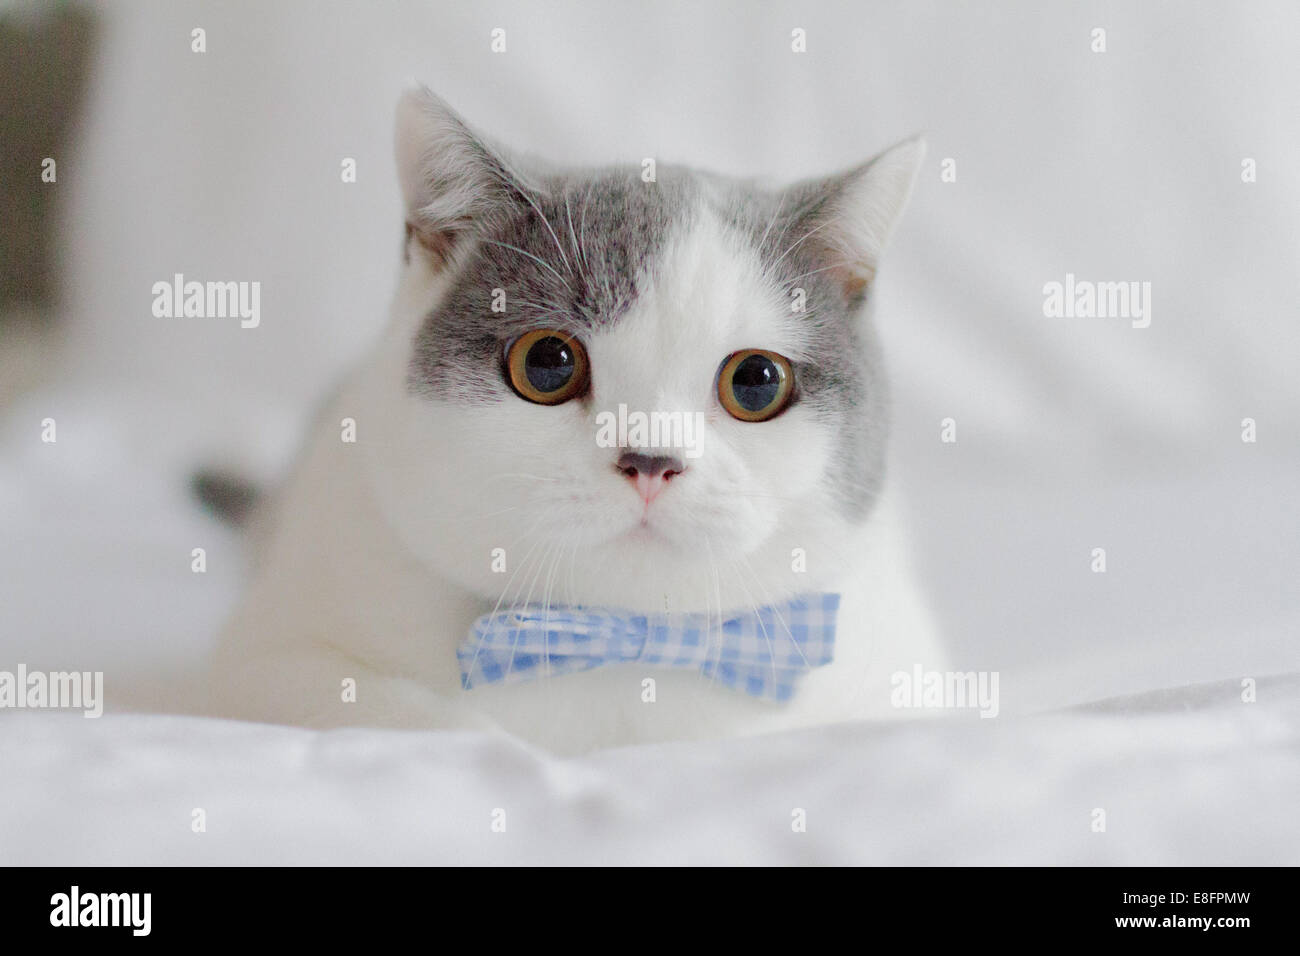 British shorthair kitten wearing a bow tie lying on a bed Stock Photo